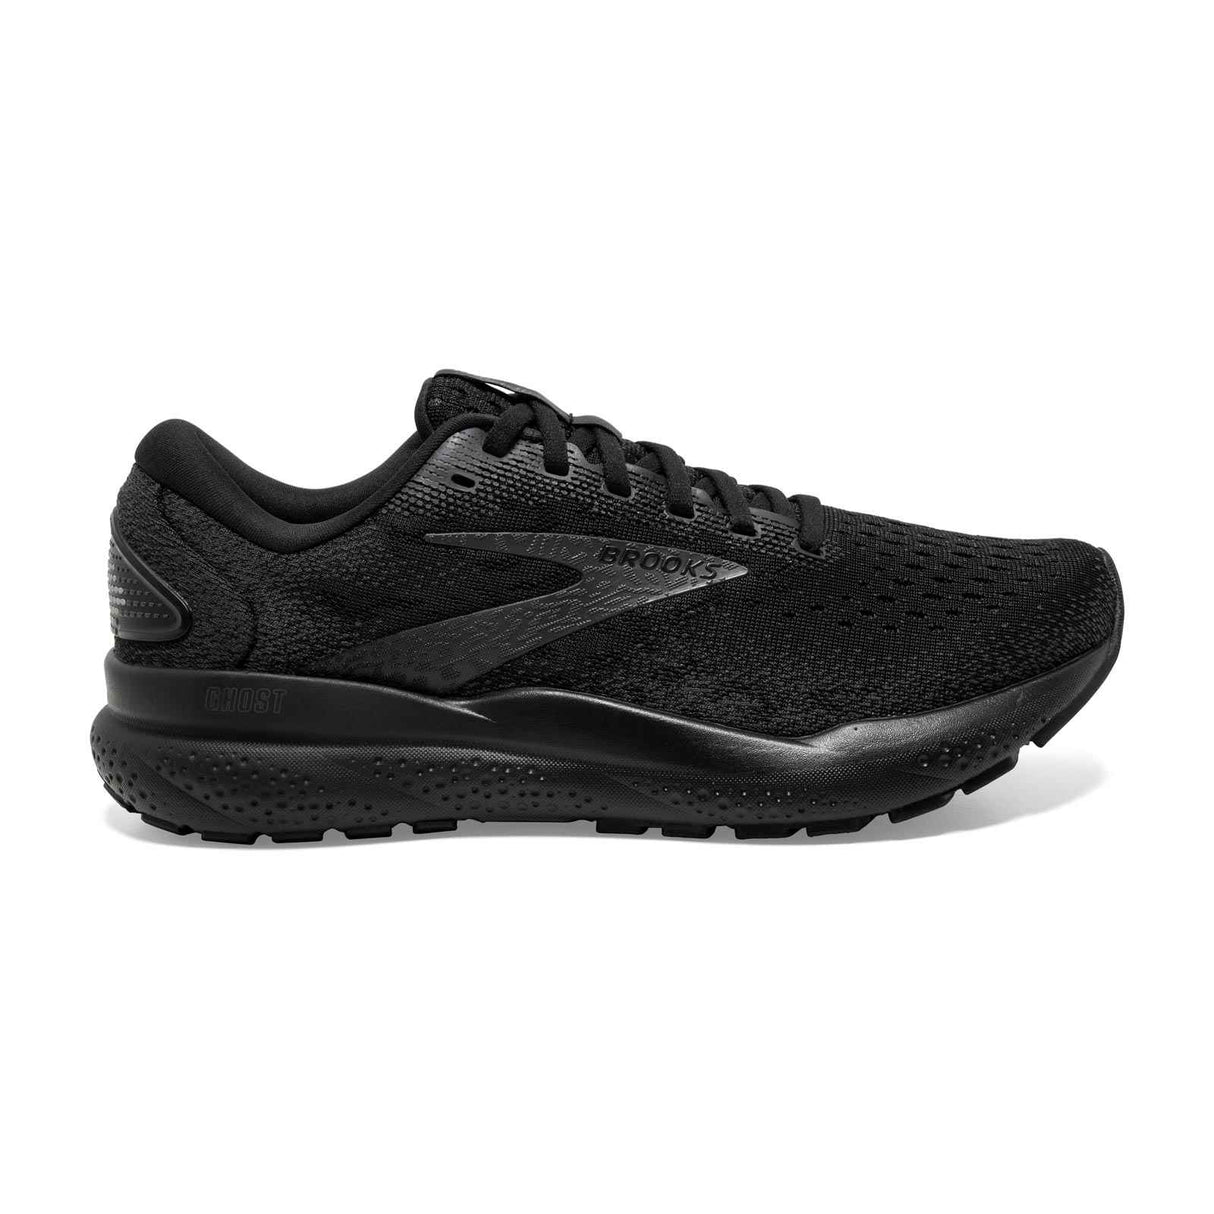 Brooks Ghost 16 Mens Road Running Shoes